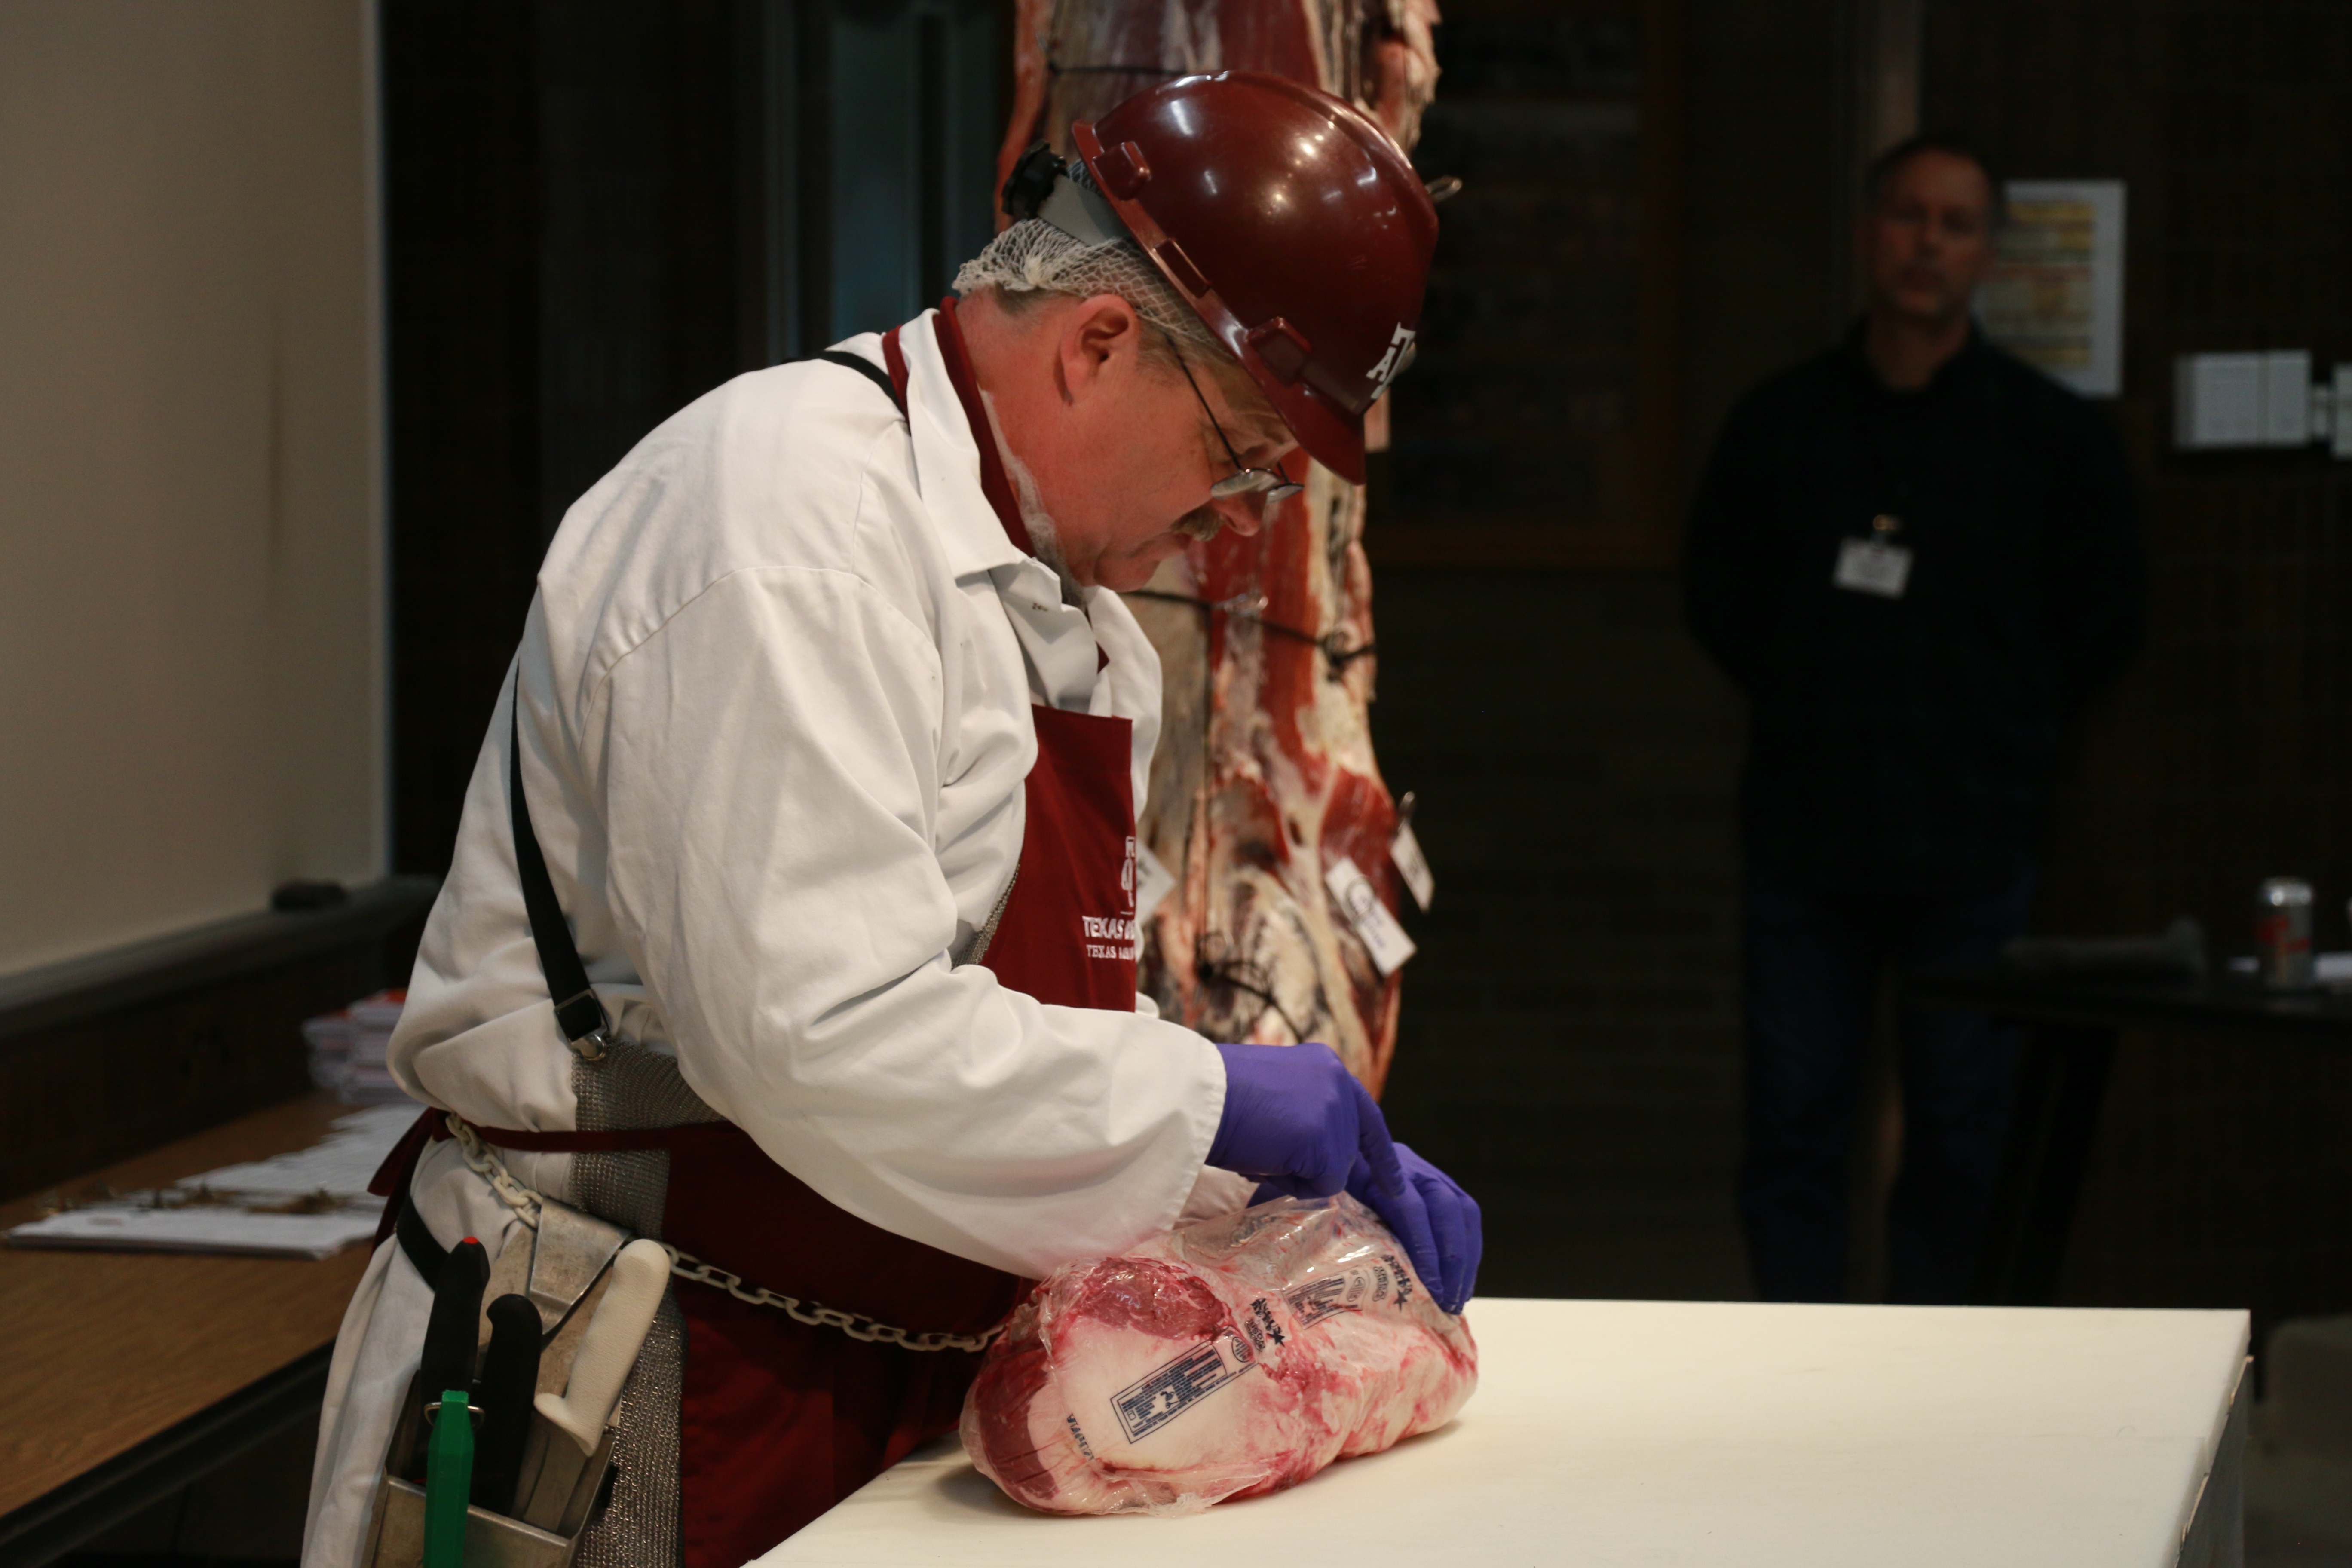 Davey Griffin removing the package from a beef brisket